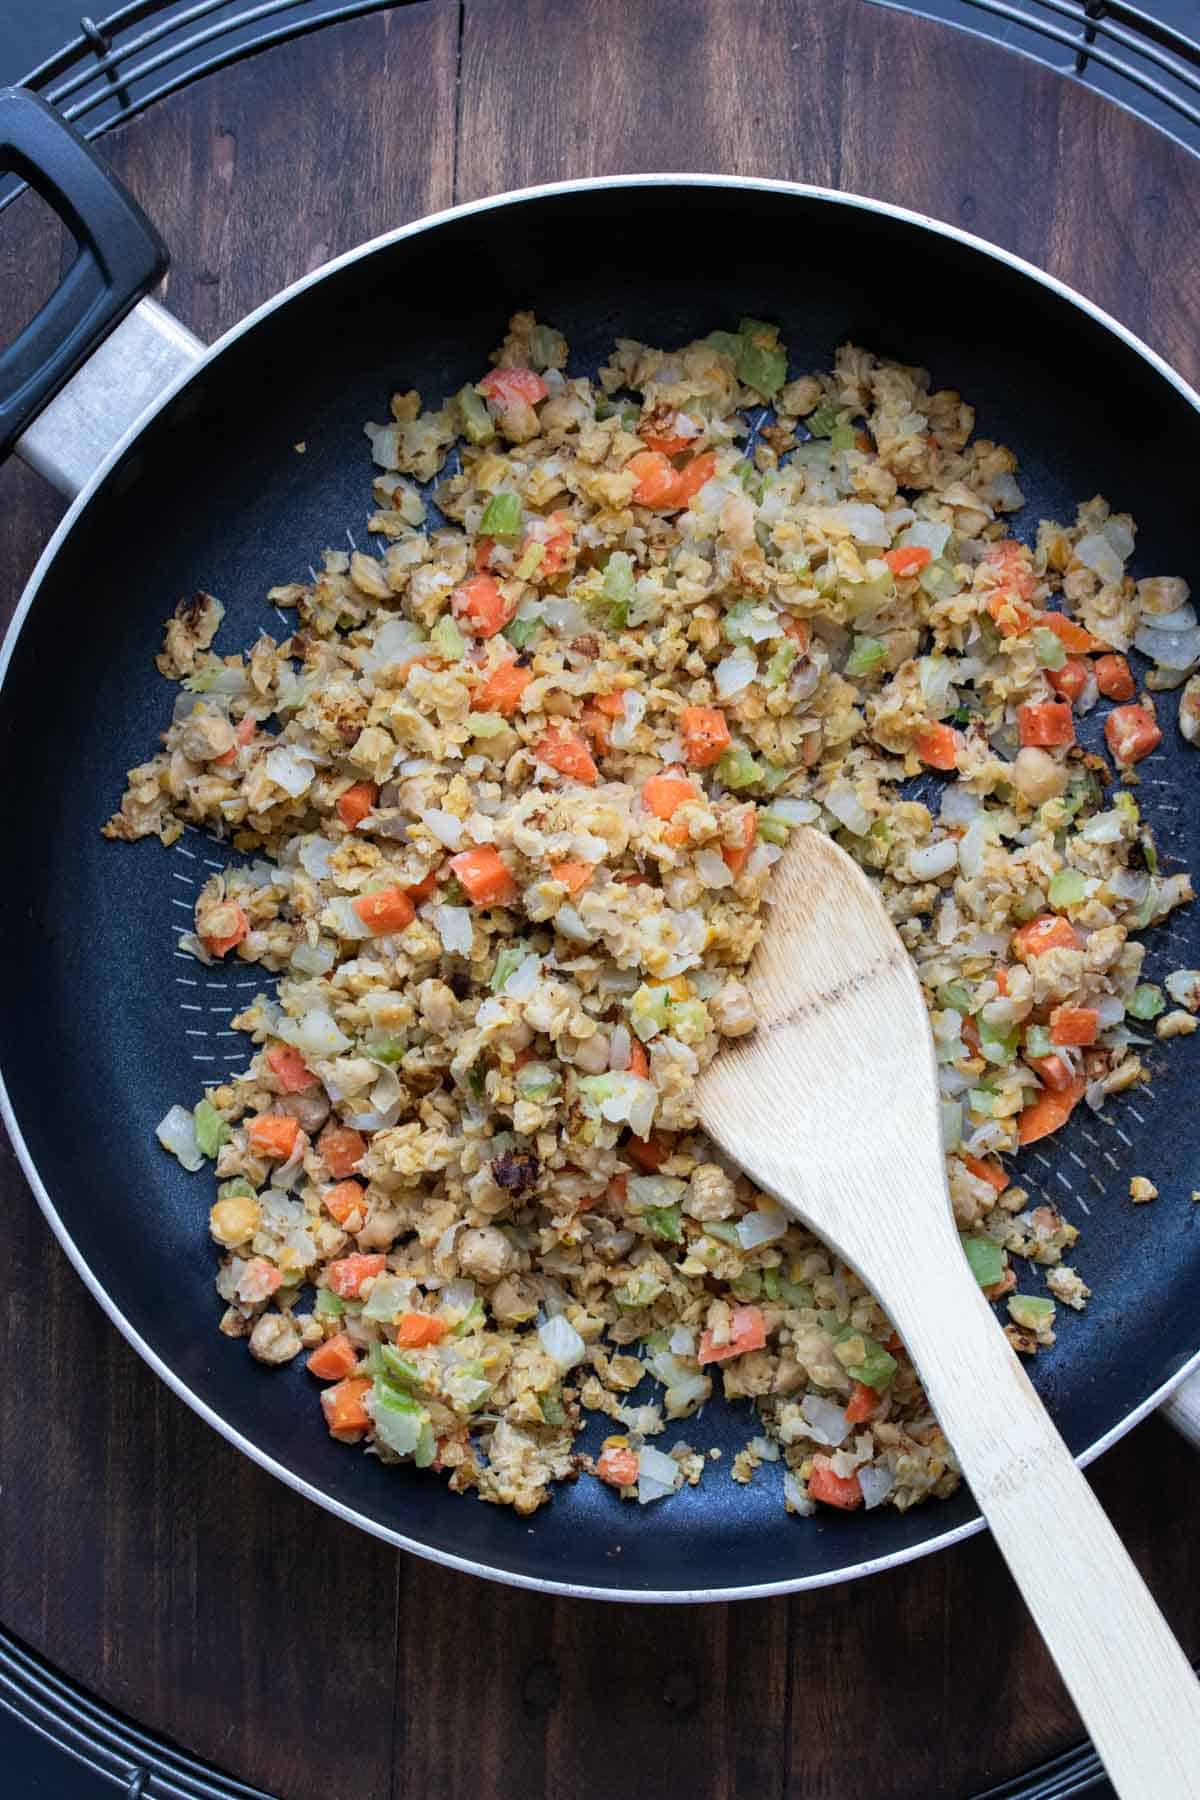 Wooden spoon mixing stuffing ingredients in a pan